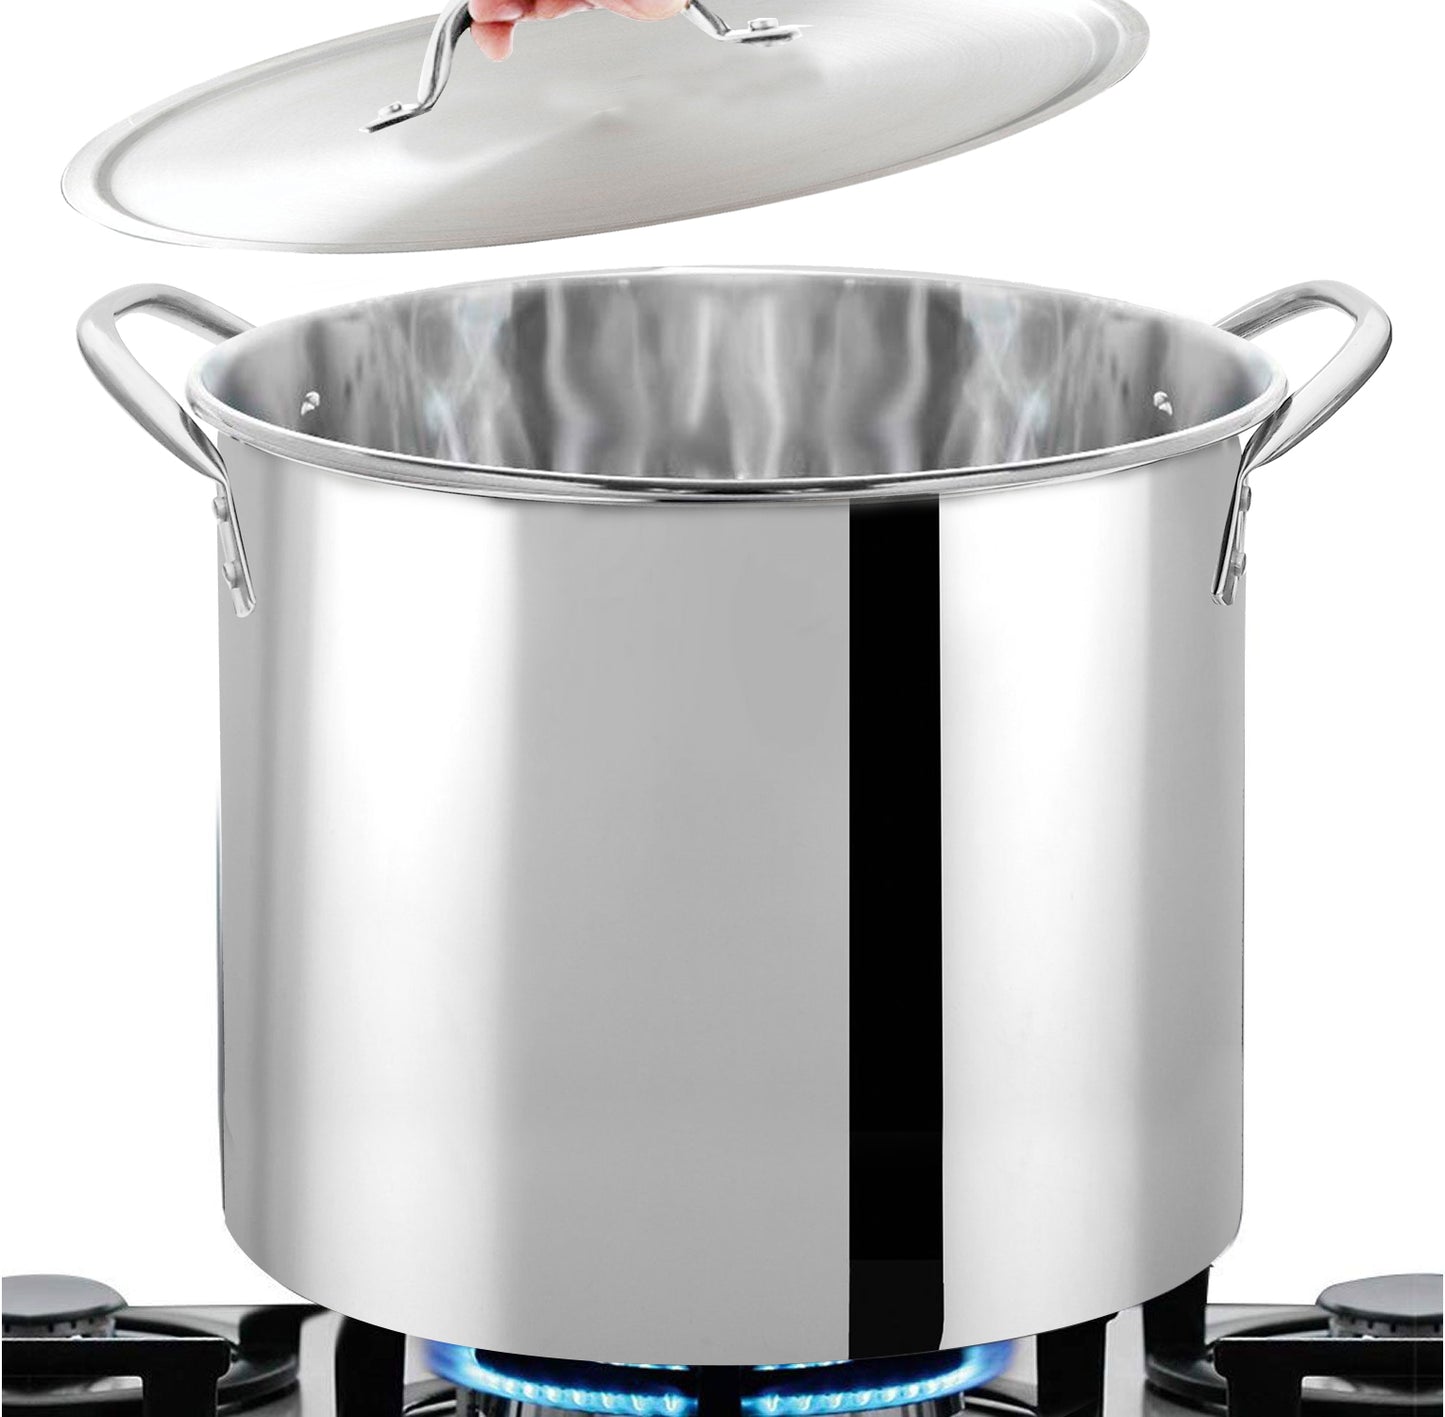 
                  
                    Bene Casa Stainless-Steel Stock Pot with lid, high capacity stock pot, reinforced bottom stainless-steel stock pot
                  
                